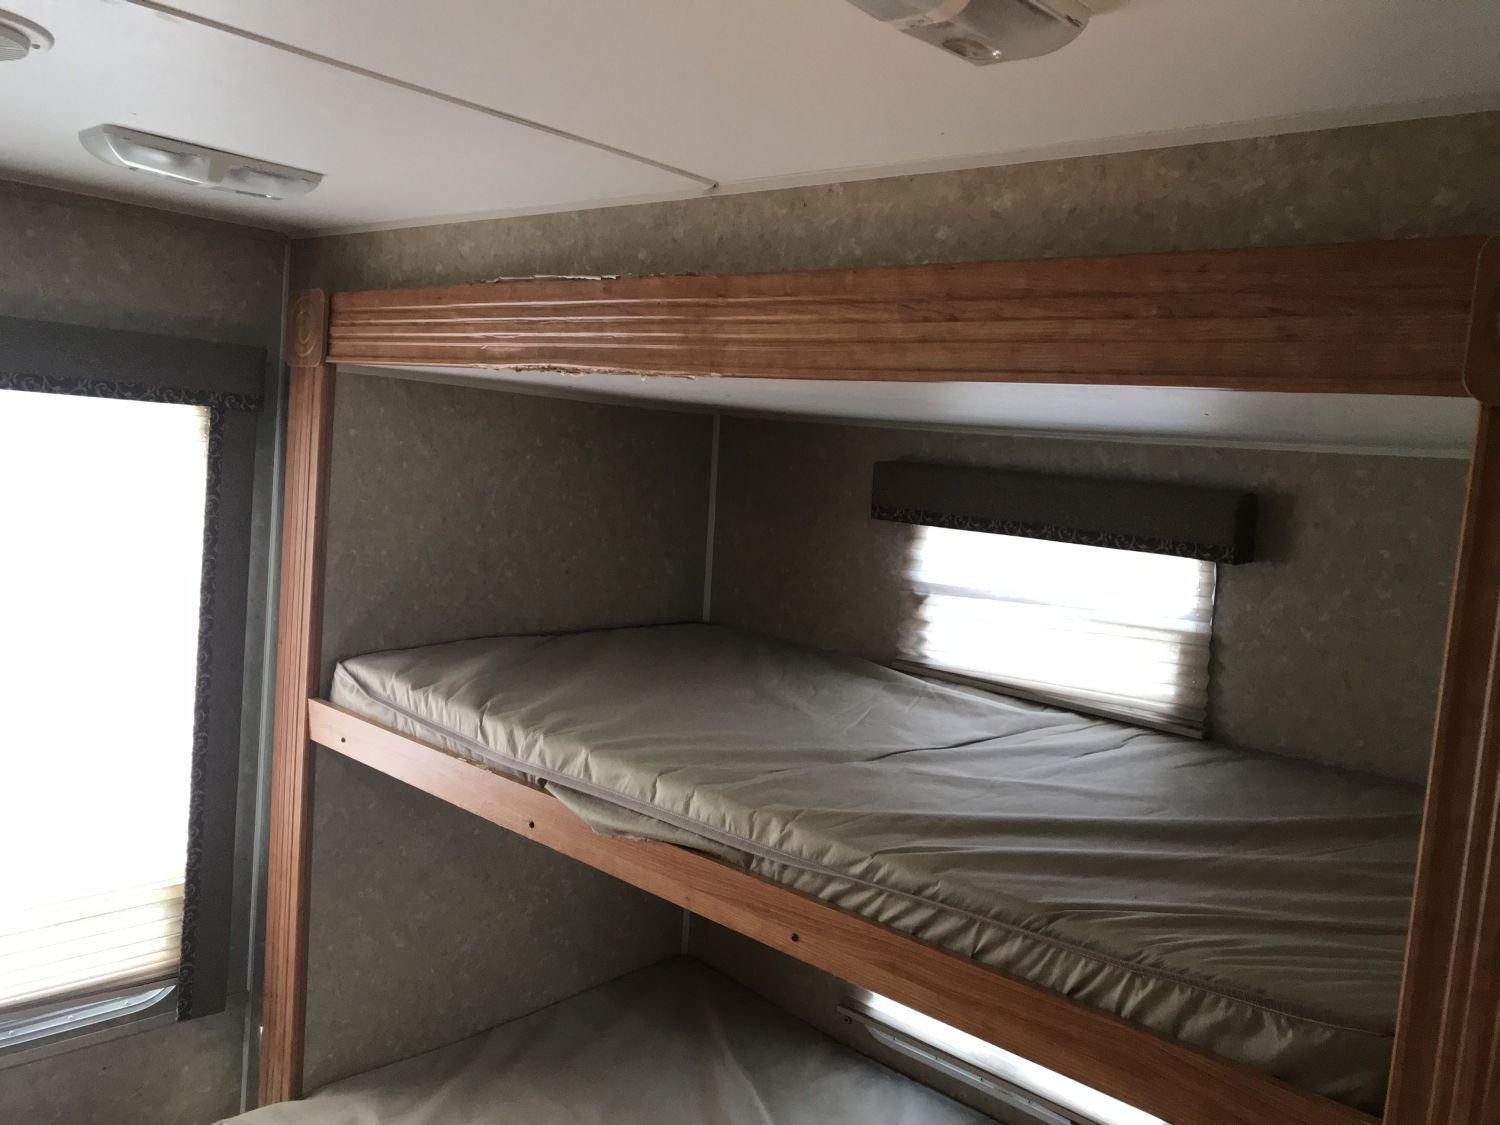 2009 Gulf Stream Conquest 32TBR tandem axle 35'8" camper with 2 slides (living room and back bedroom